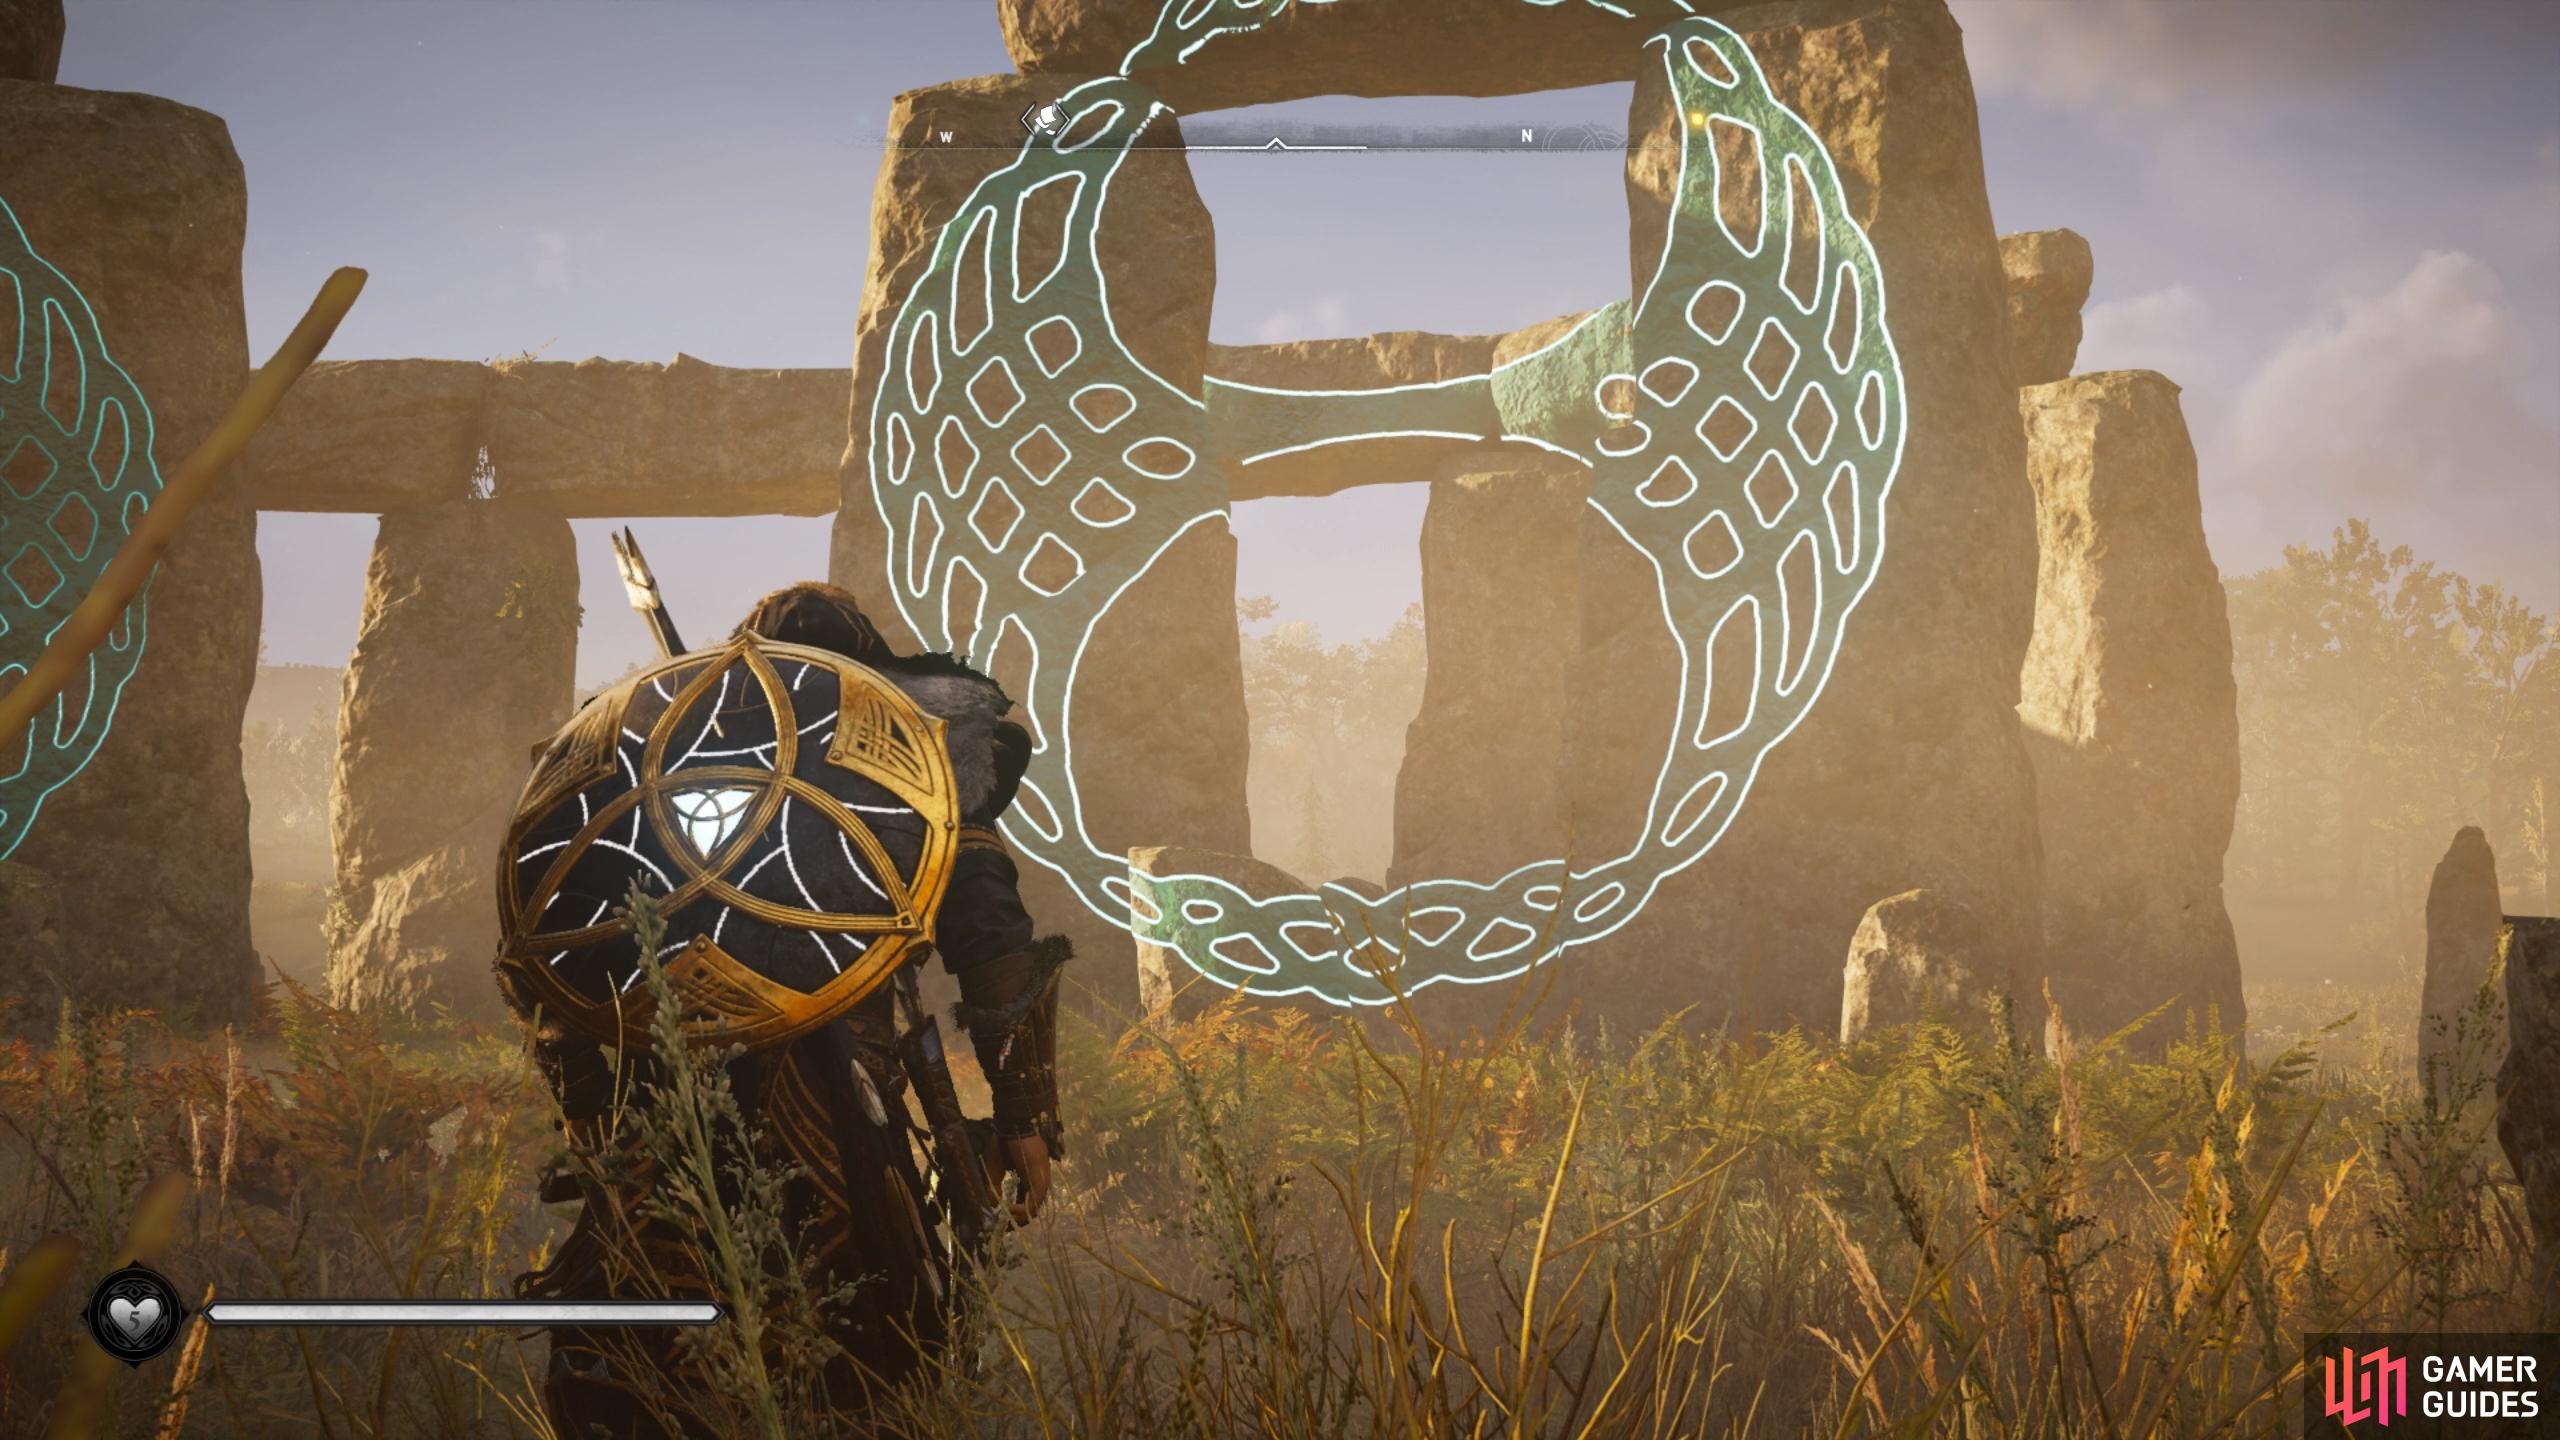 You'll need to face northwest when standing in the monument to align the symbol.